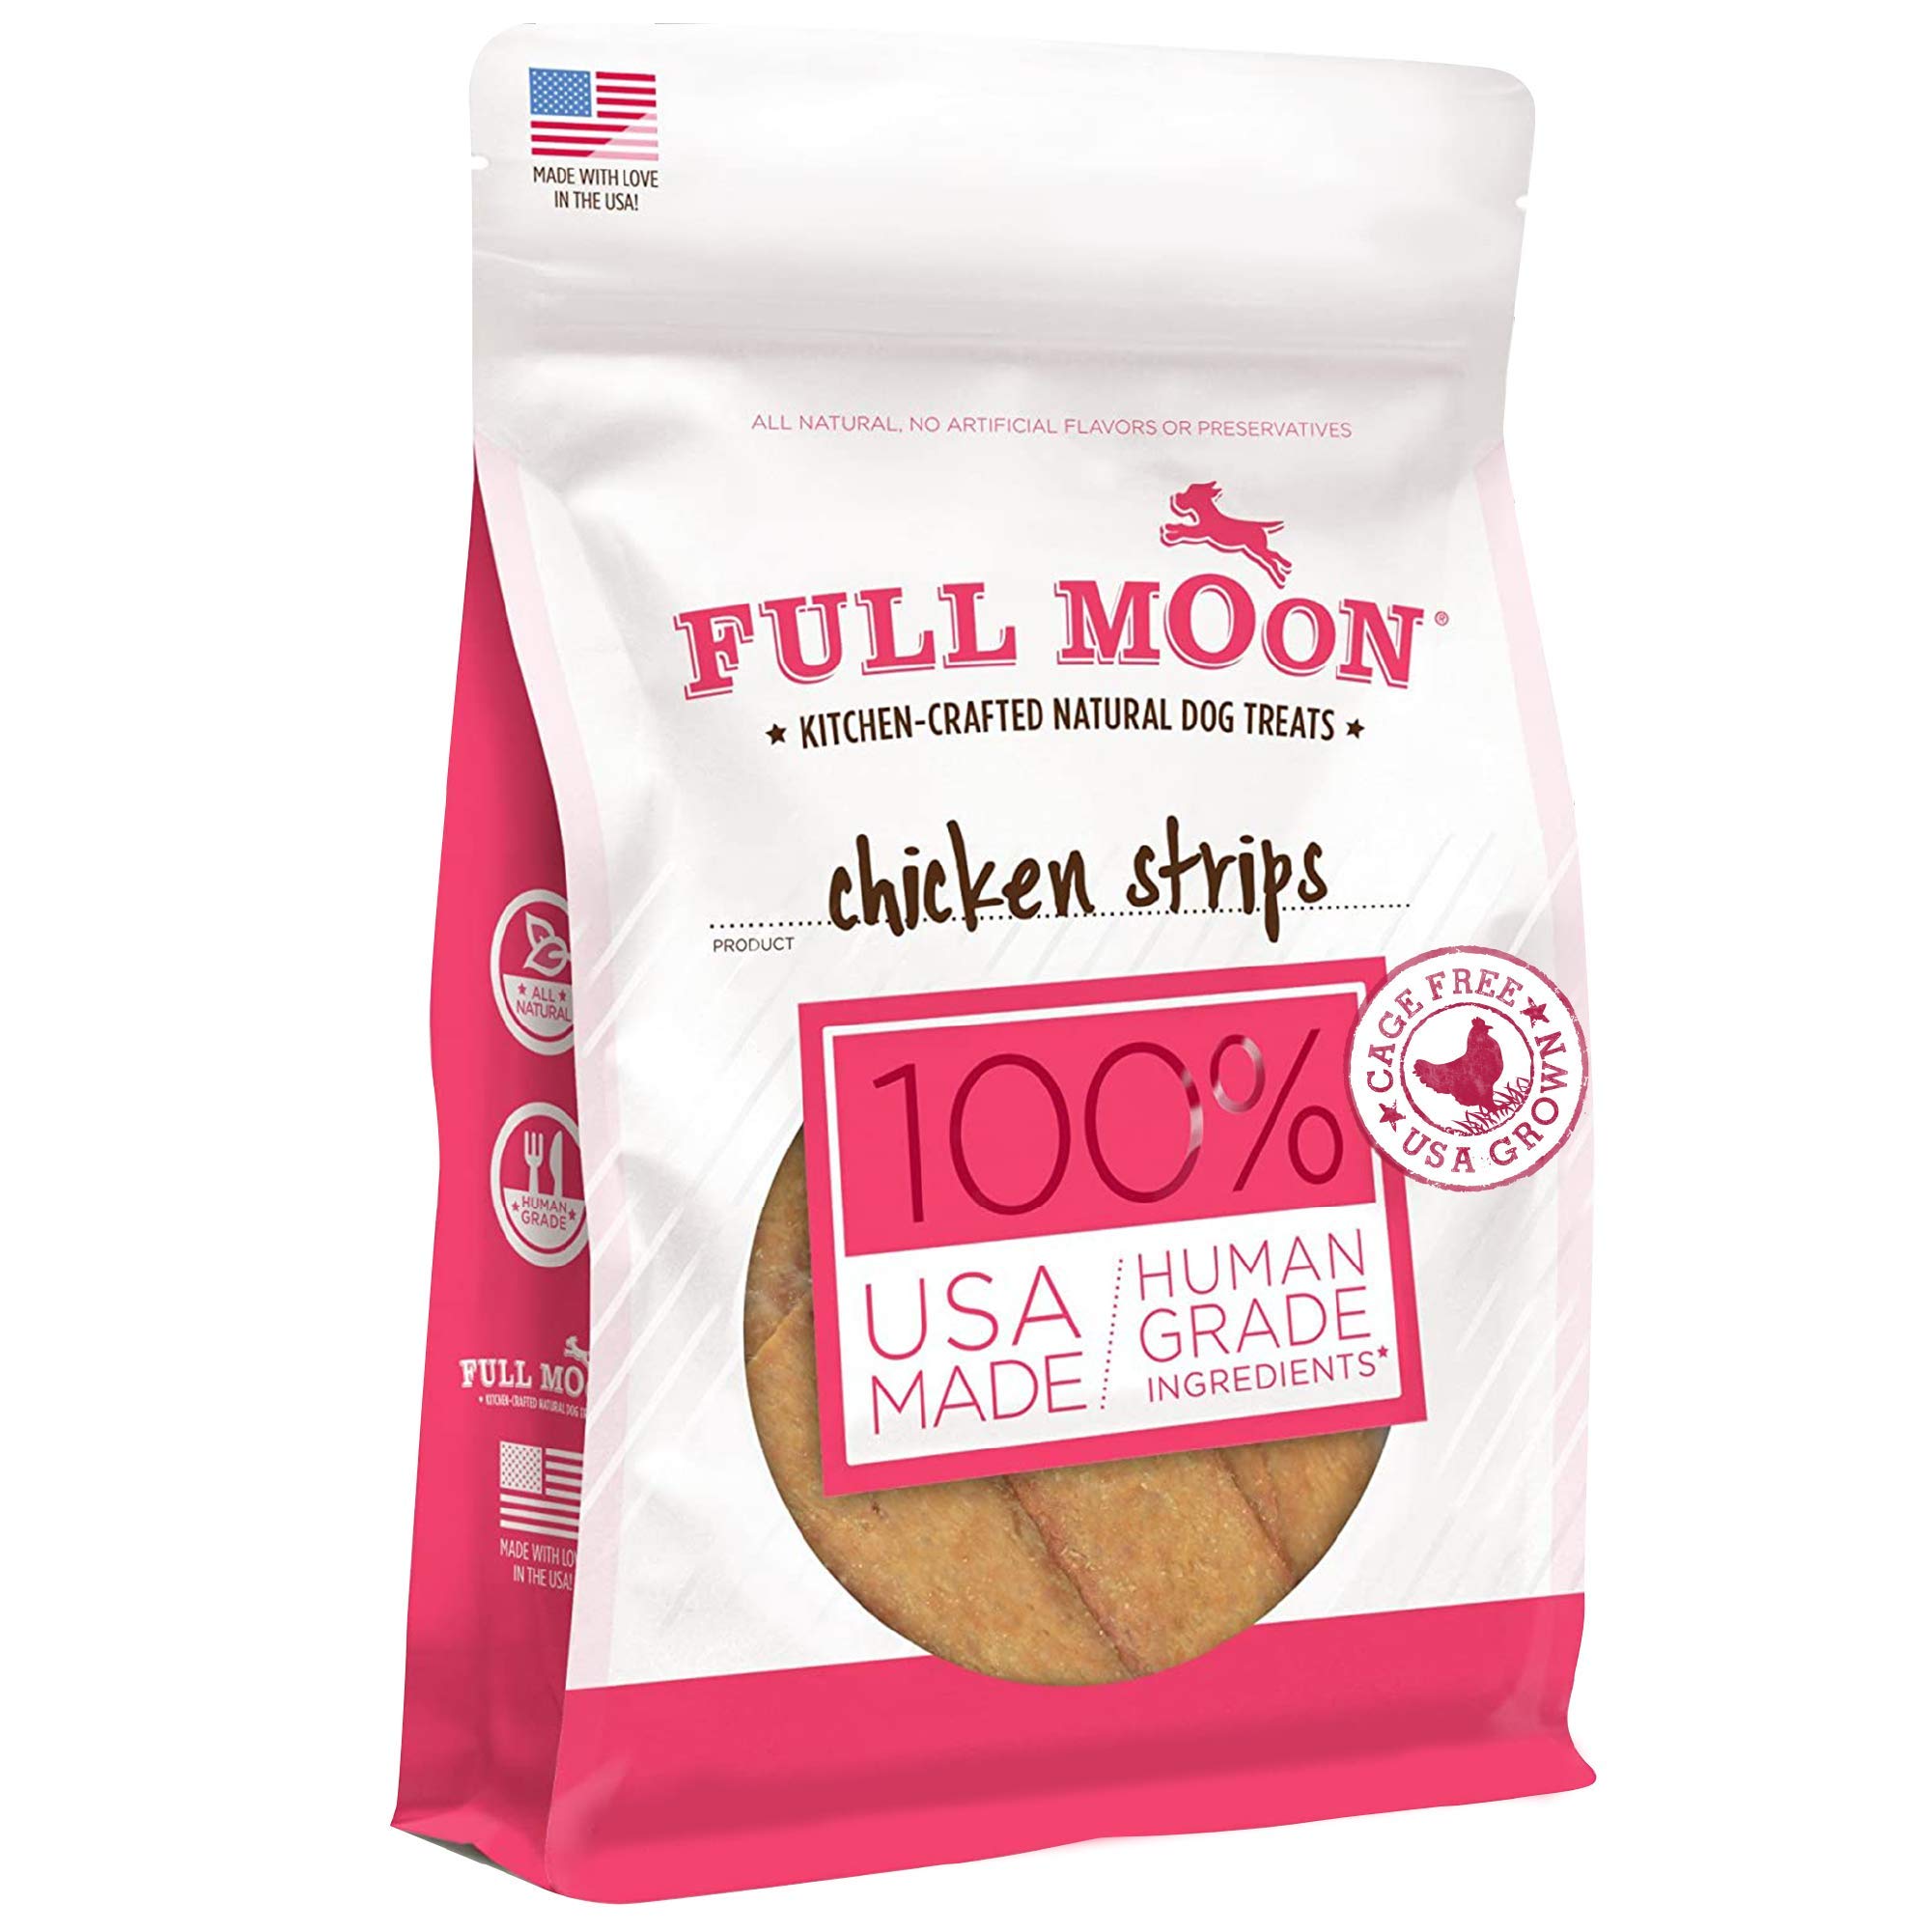 24-Oz. Full Moon Chicken Strips Healthy All Natural Dog Treats $8.54 w/ S&S + Free Shipping w/ Prime or on $35+